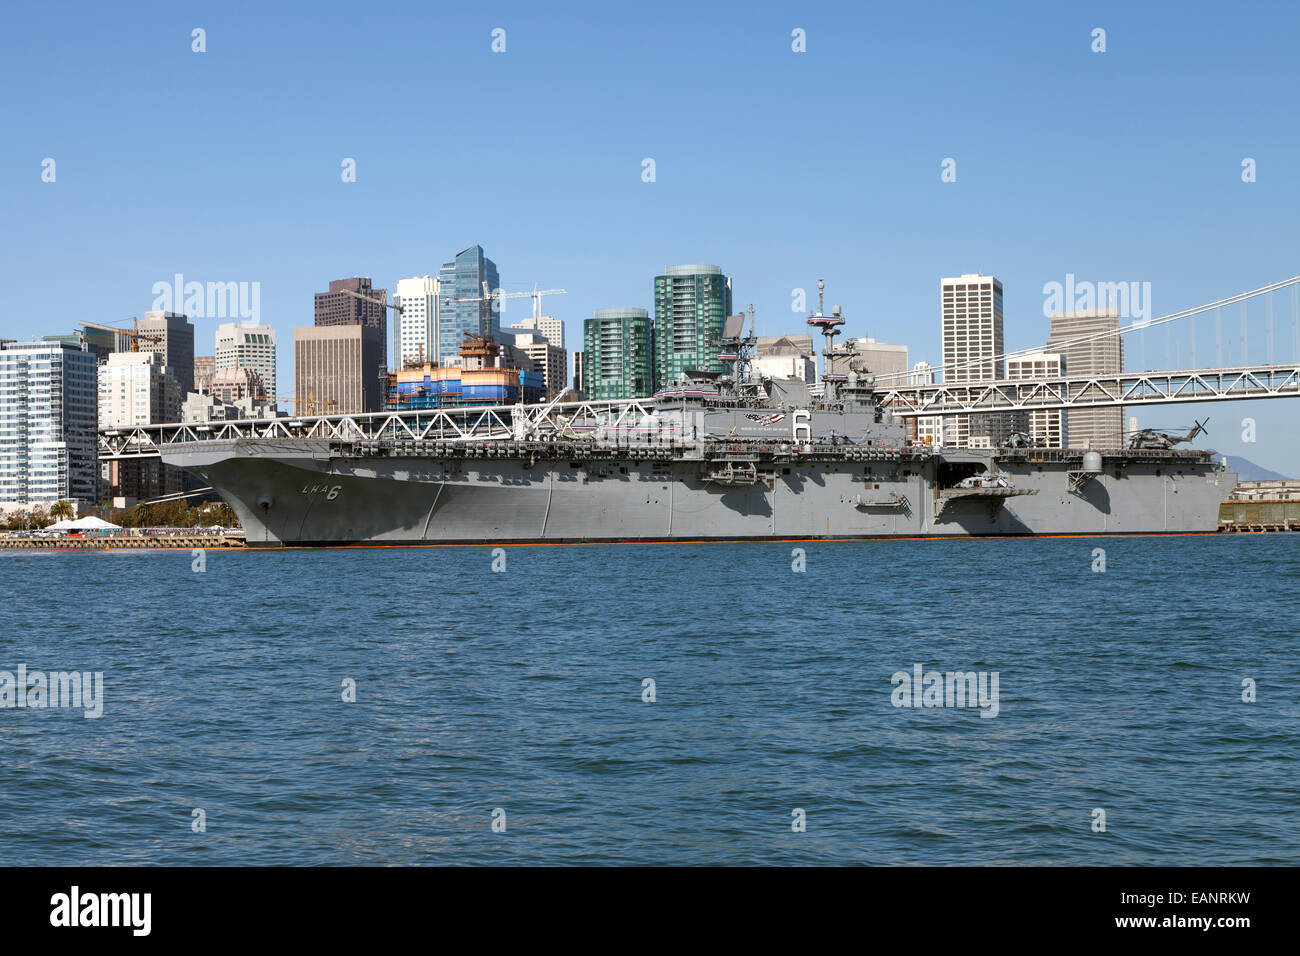 USS America (LHA 6) docked along the San Francisco waterfront on October 11, 2014, the day of her commissioning. Stock Photo